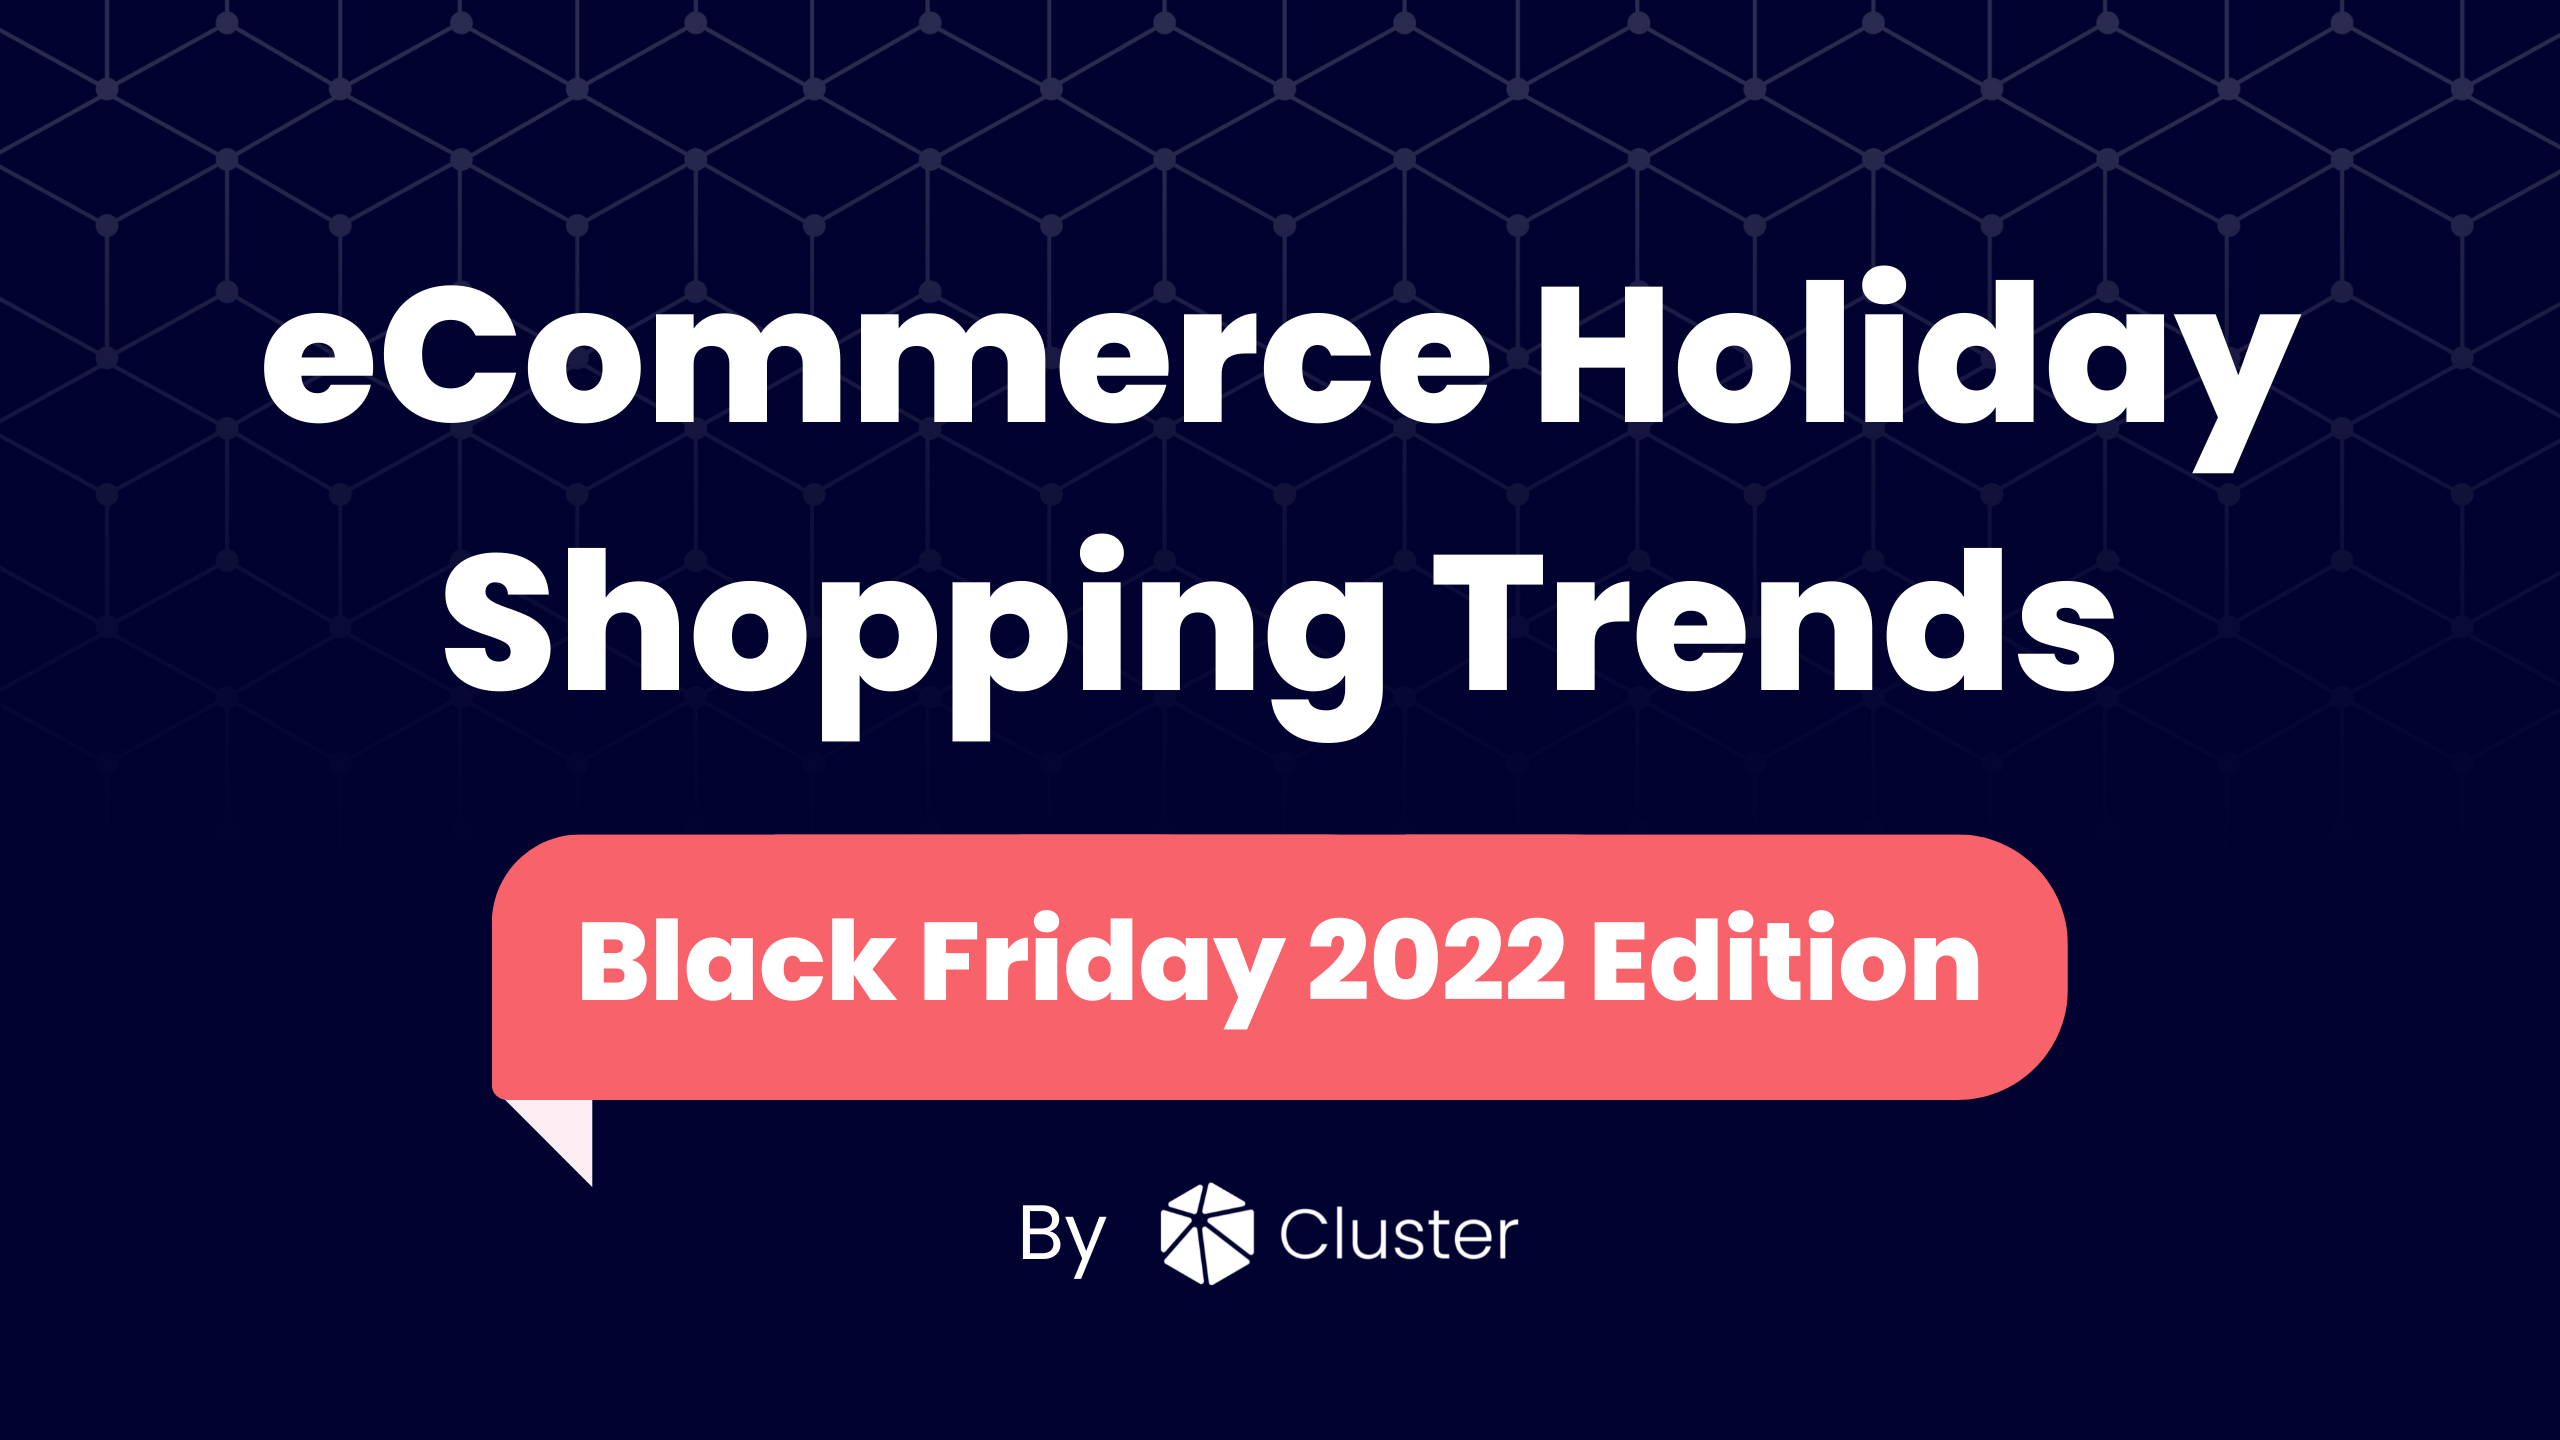 eCommerce Holiday Shopping Trends - Black Friday 2022 Edition - By Cluster datacluster.com